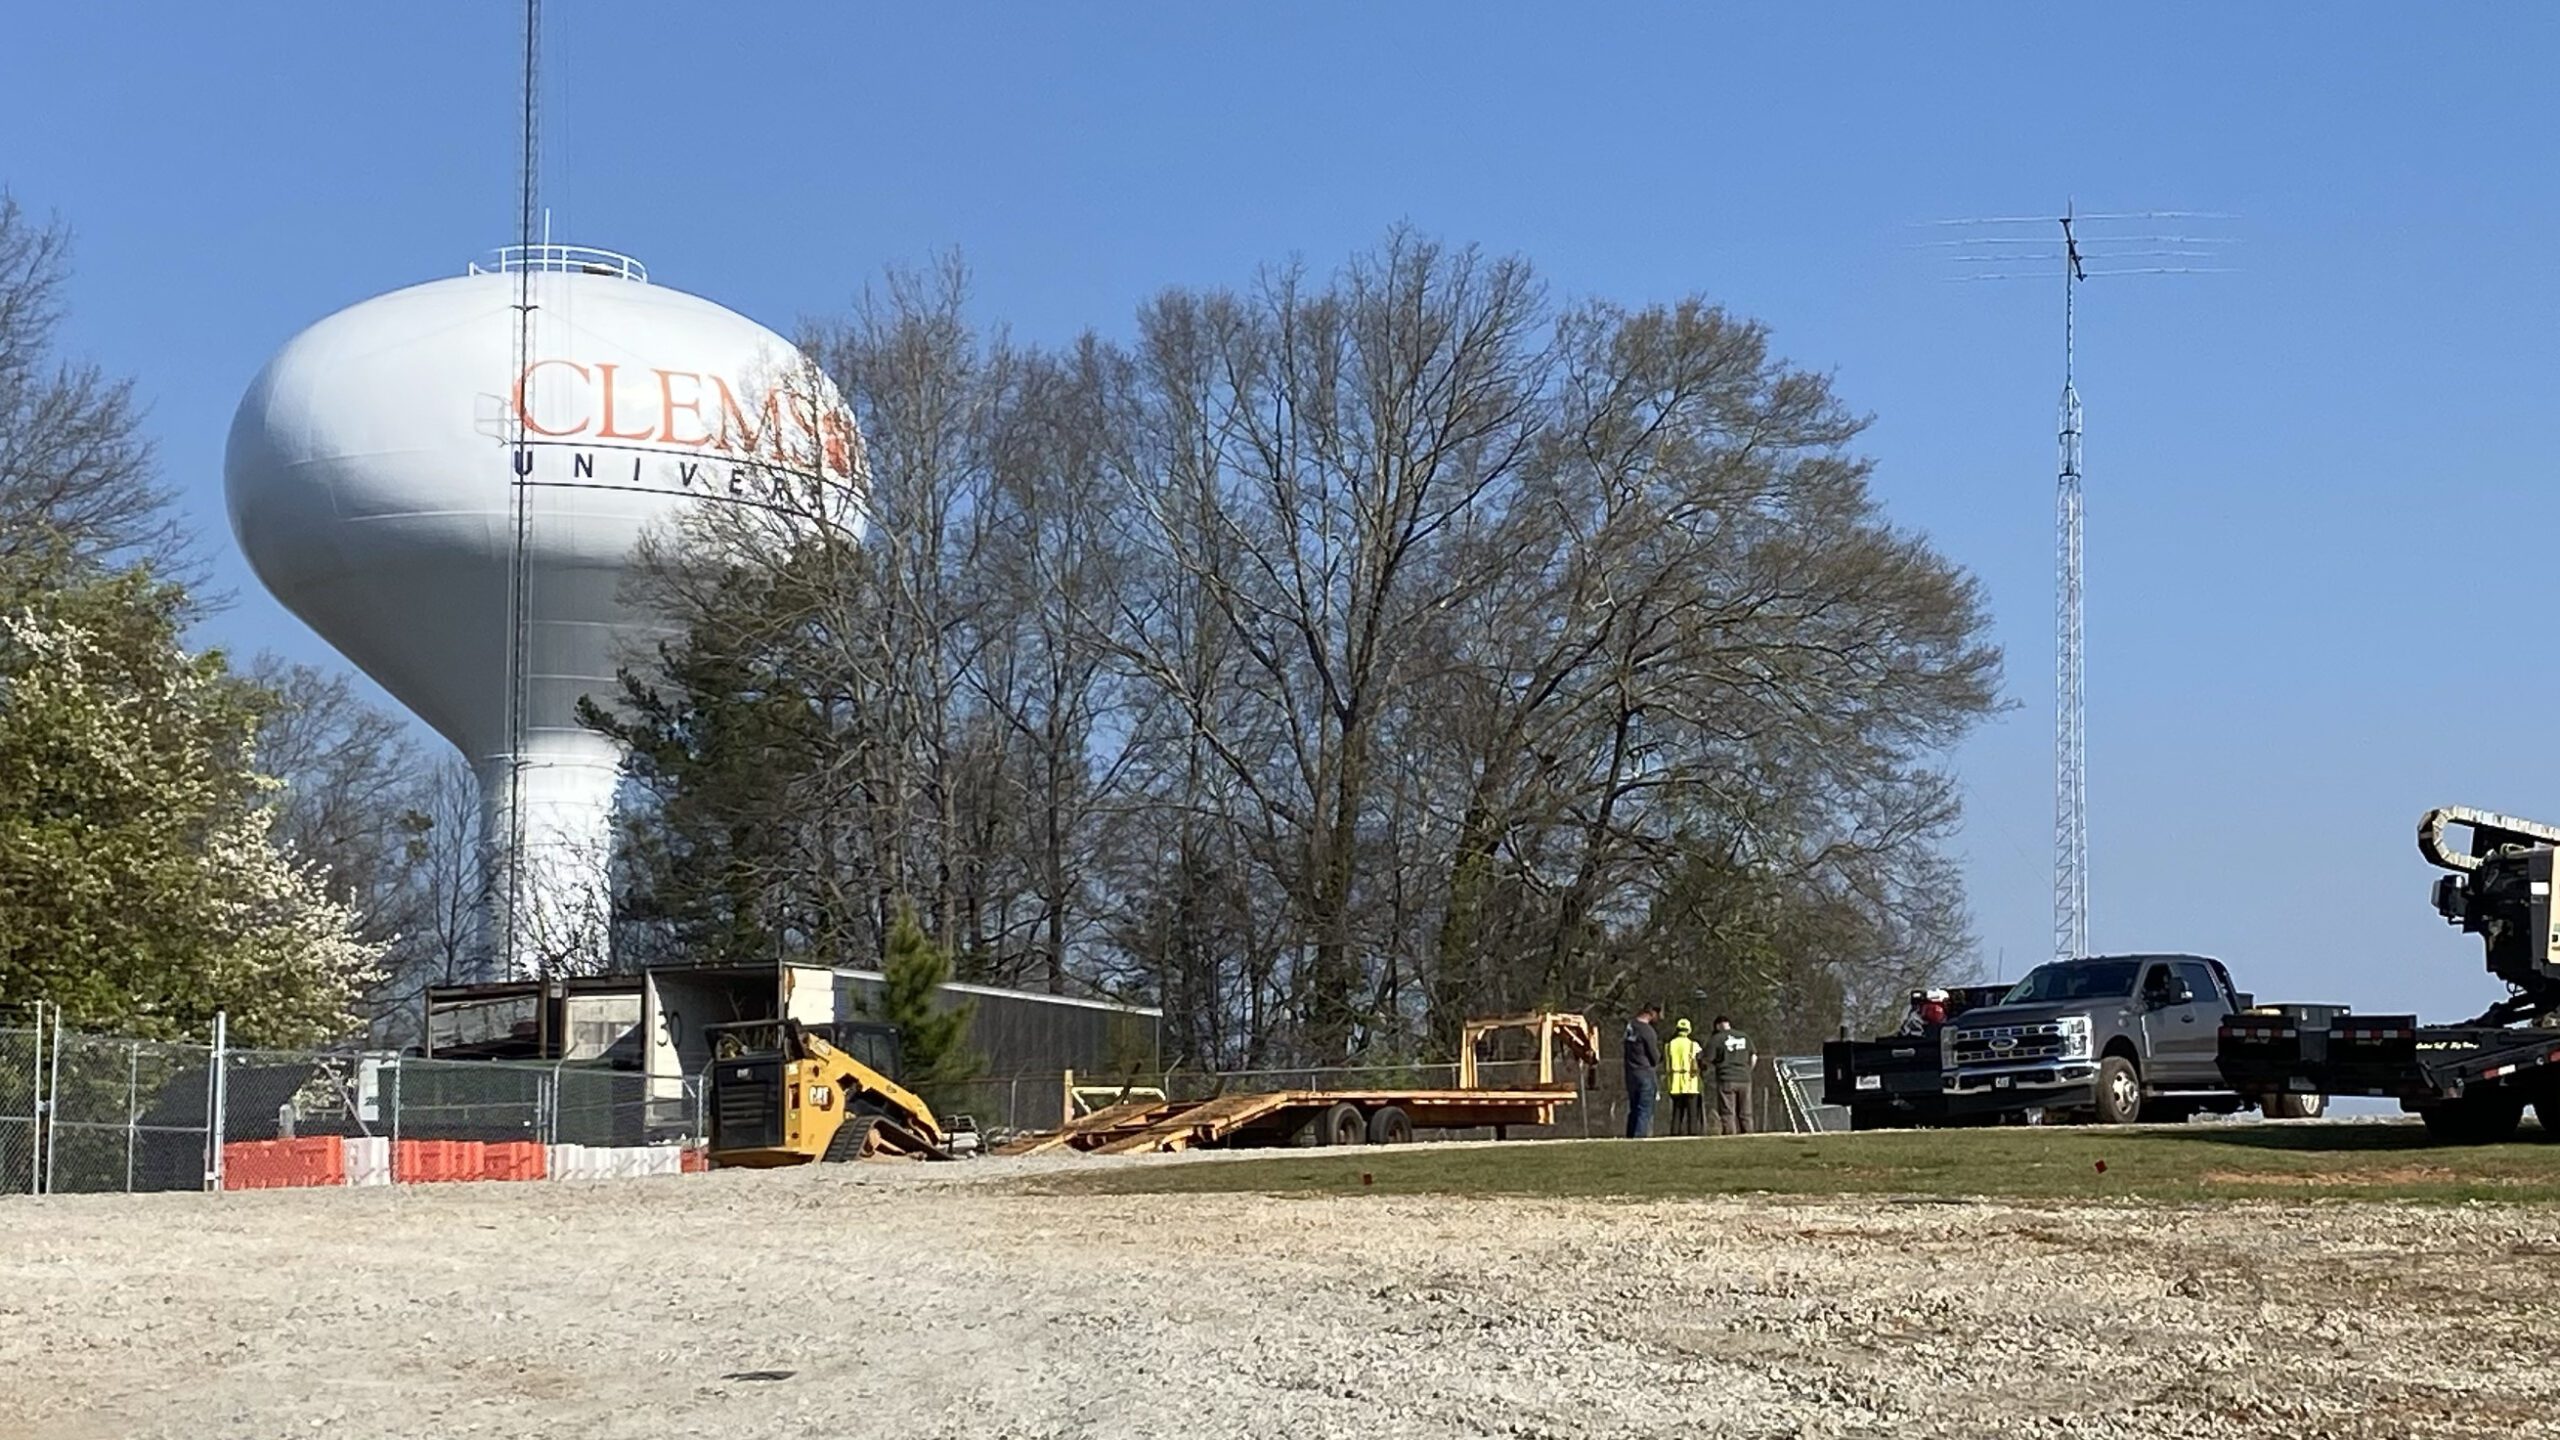 Construction vehicles on a gravel lot in front of a Clemson-branded water tower